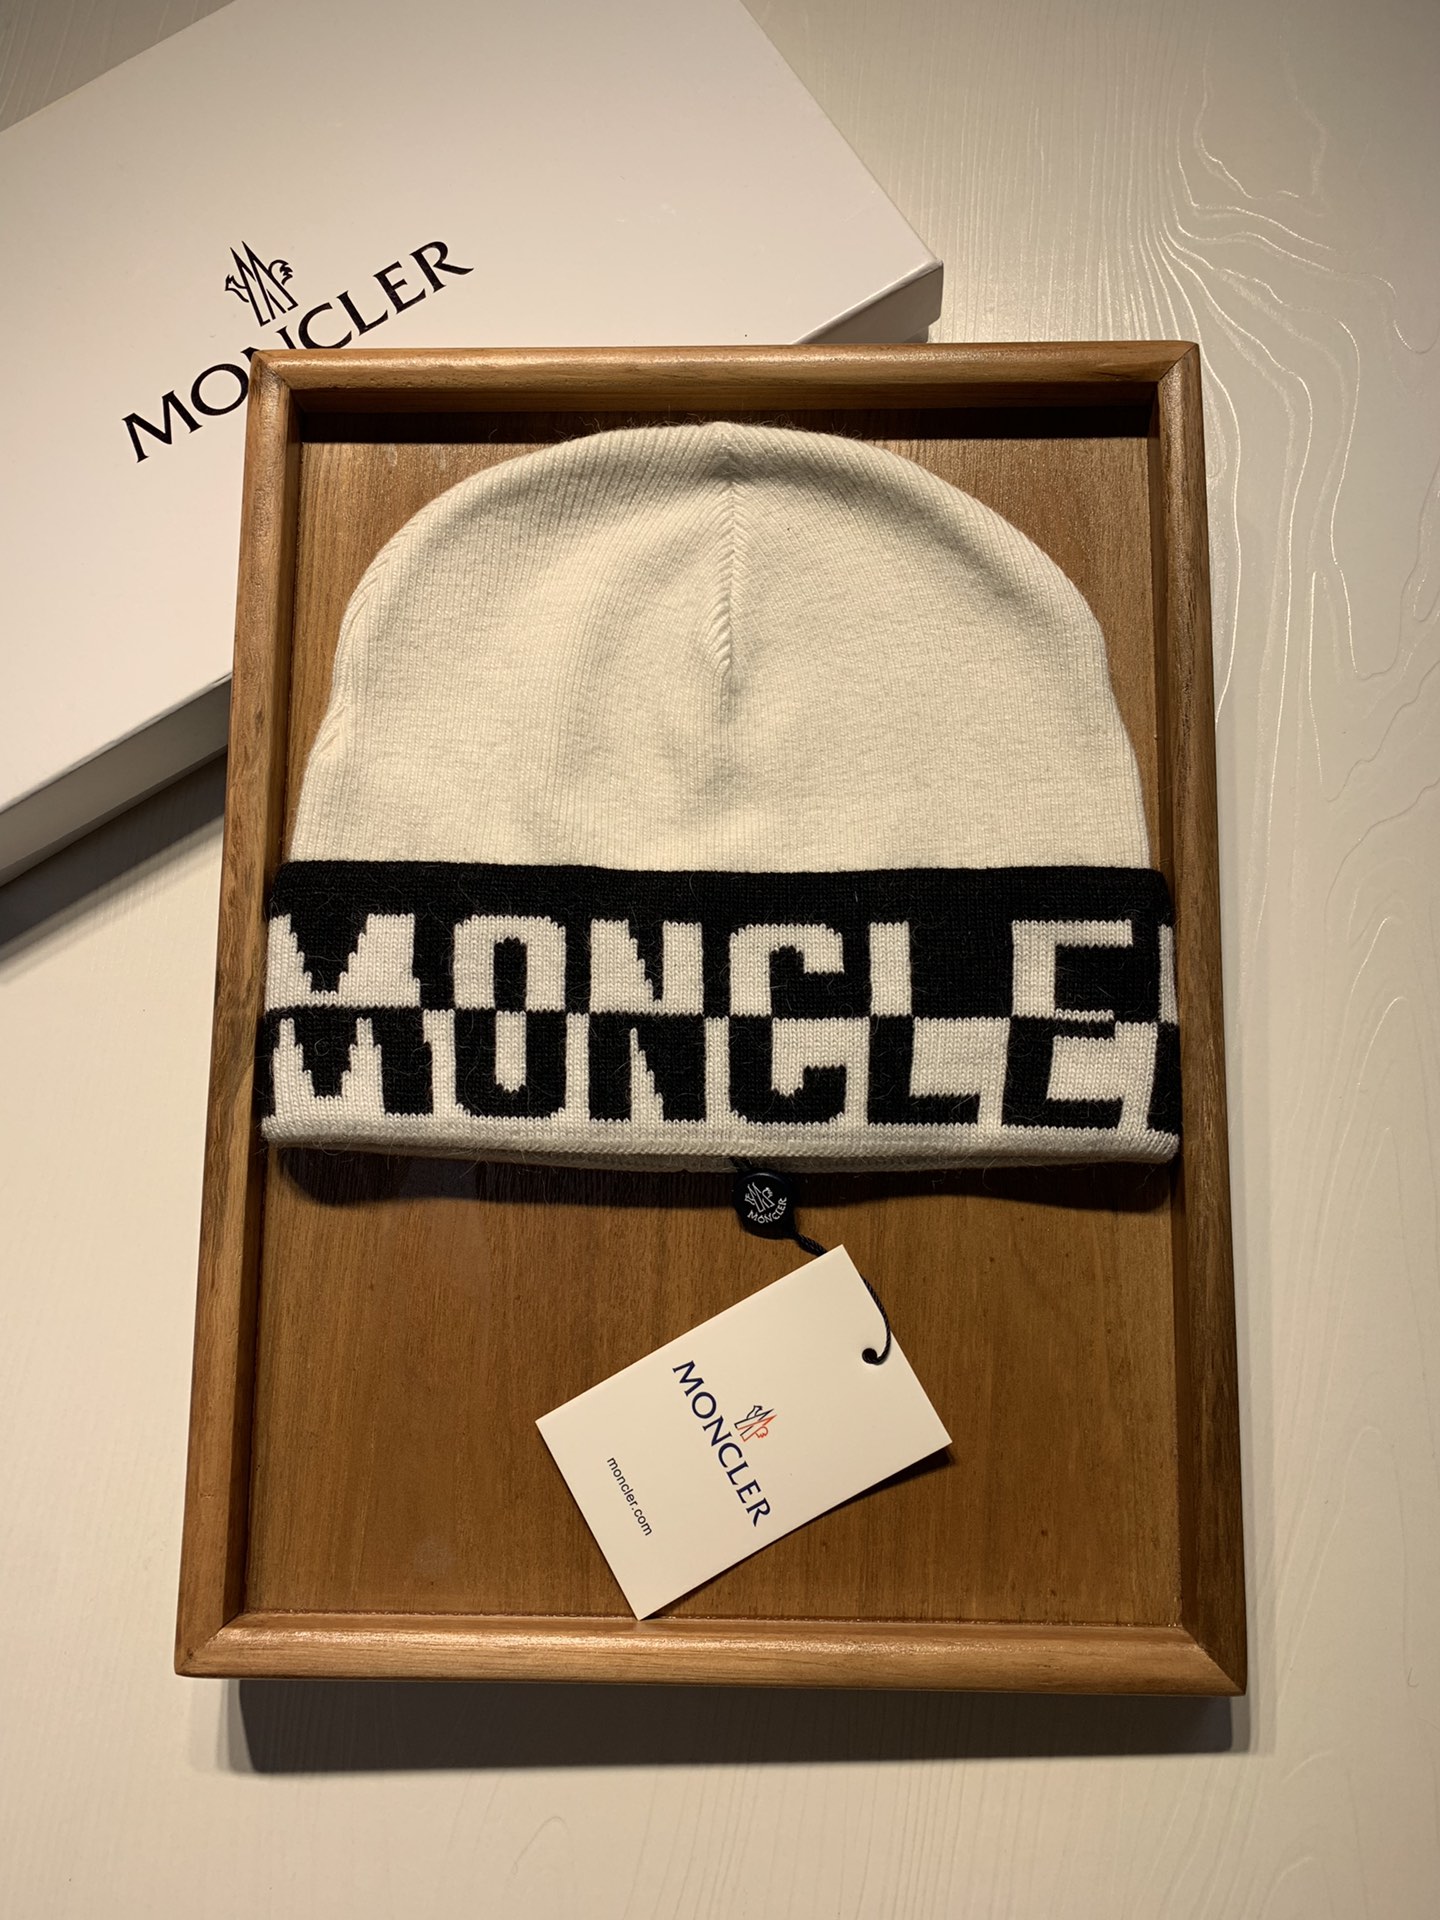 Moncler Wool Hats Unisex # 273497, cheap Moncler Wool Hats, only $30!